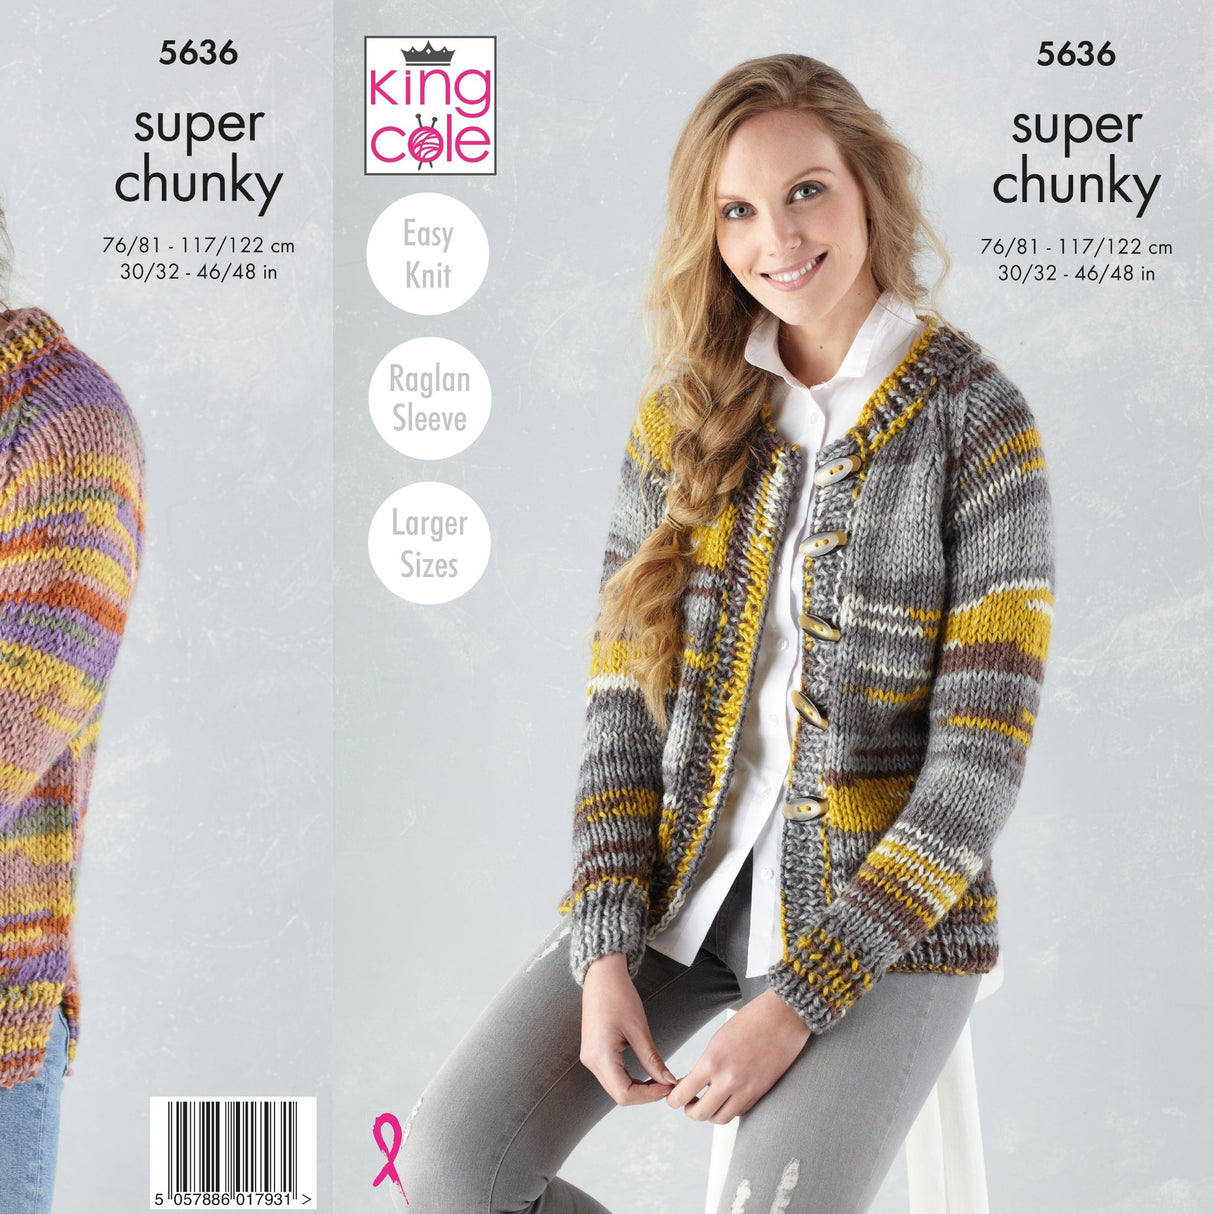 King Cole Patterns King Cole Ladies Sweater and Cardigan Super Chunky Pattern 5636